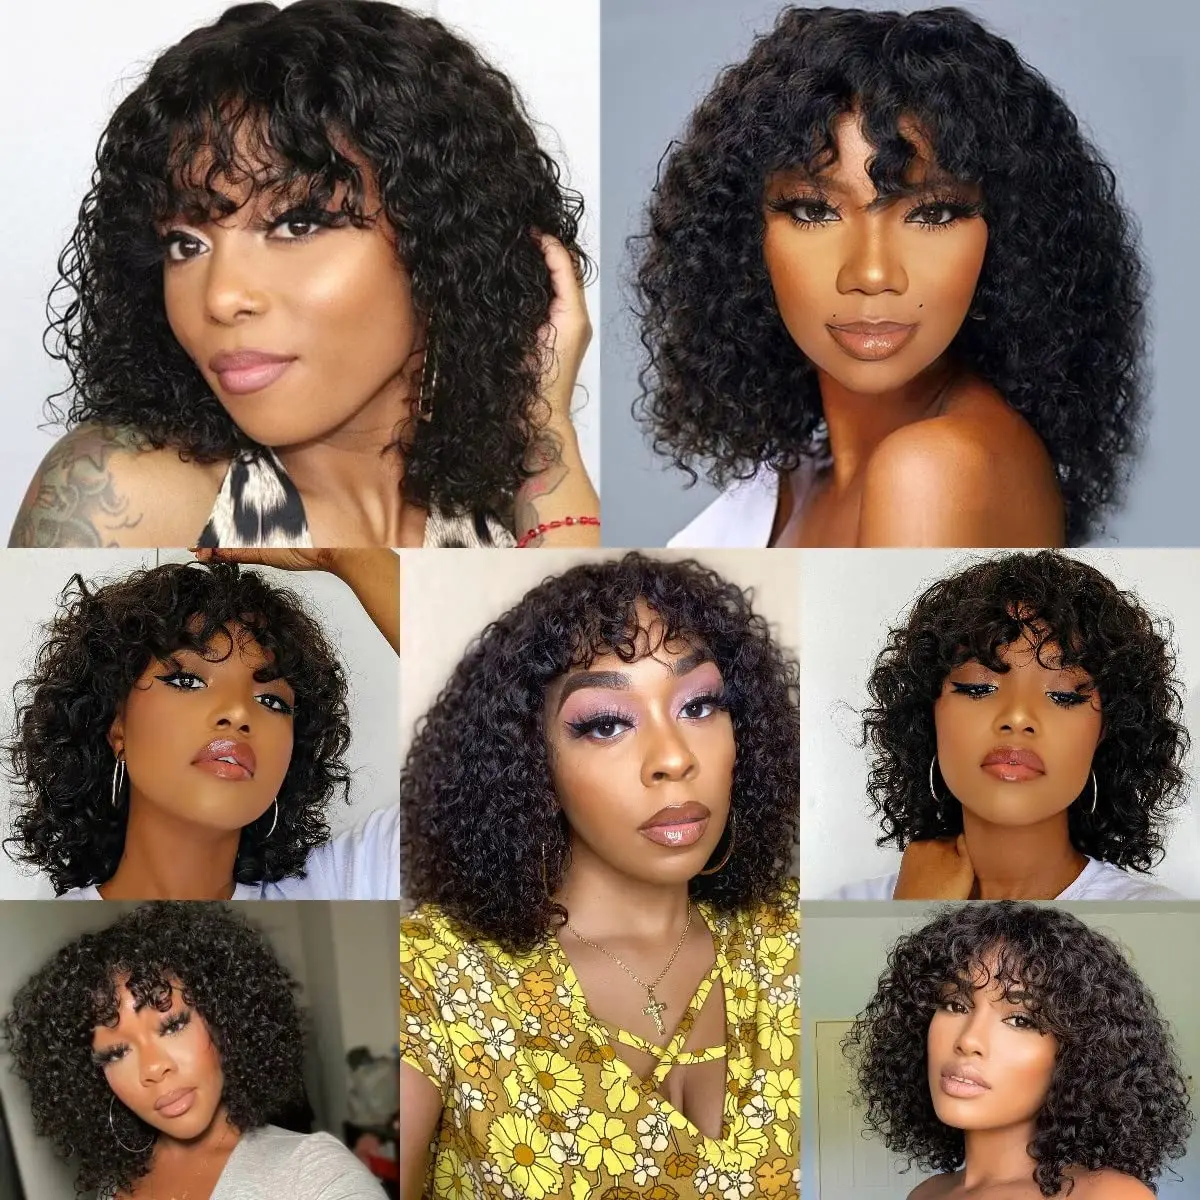 Short Kinky Curly Bangs Wig For Women 180% Density Jerry Curly Human Hair Wig With Bangs Machine Made Wig Brazilian Remy Hair